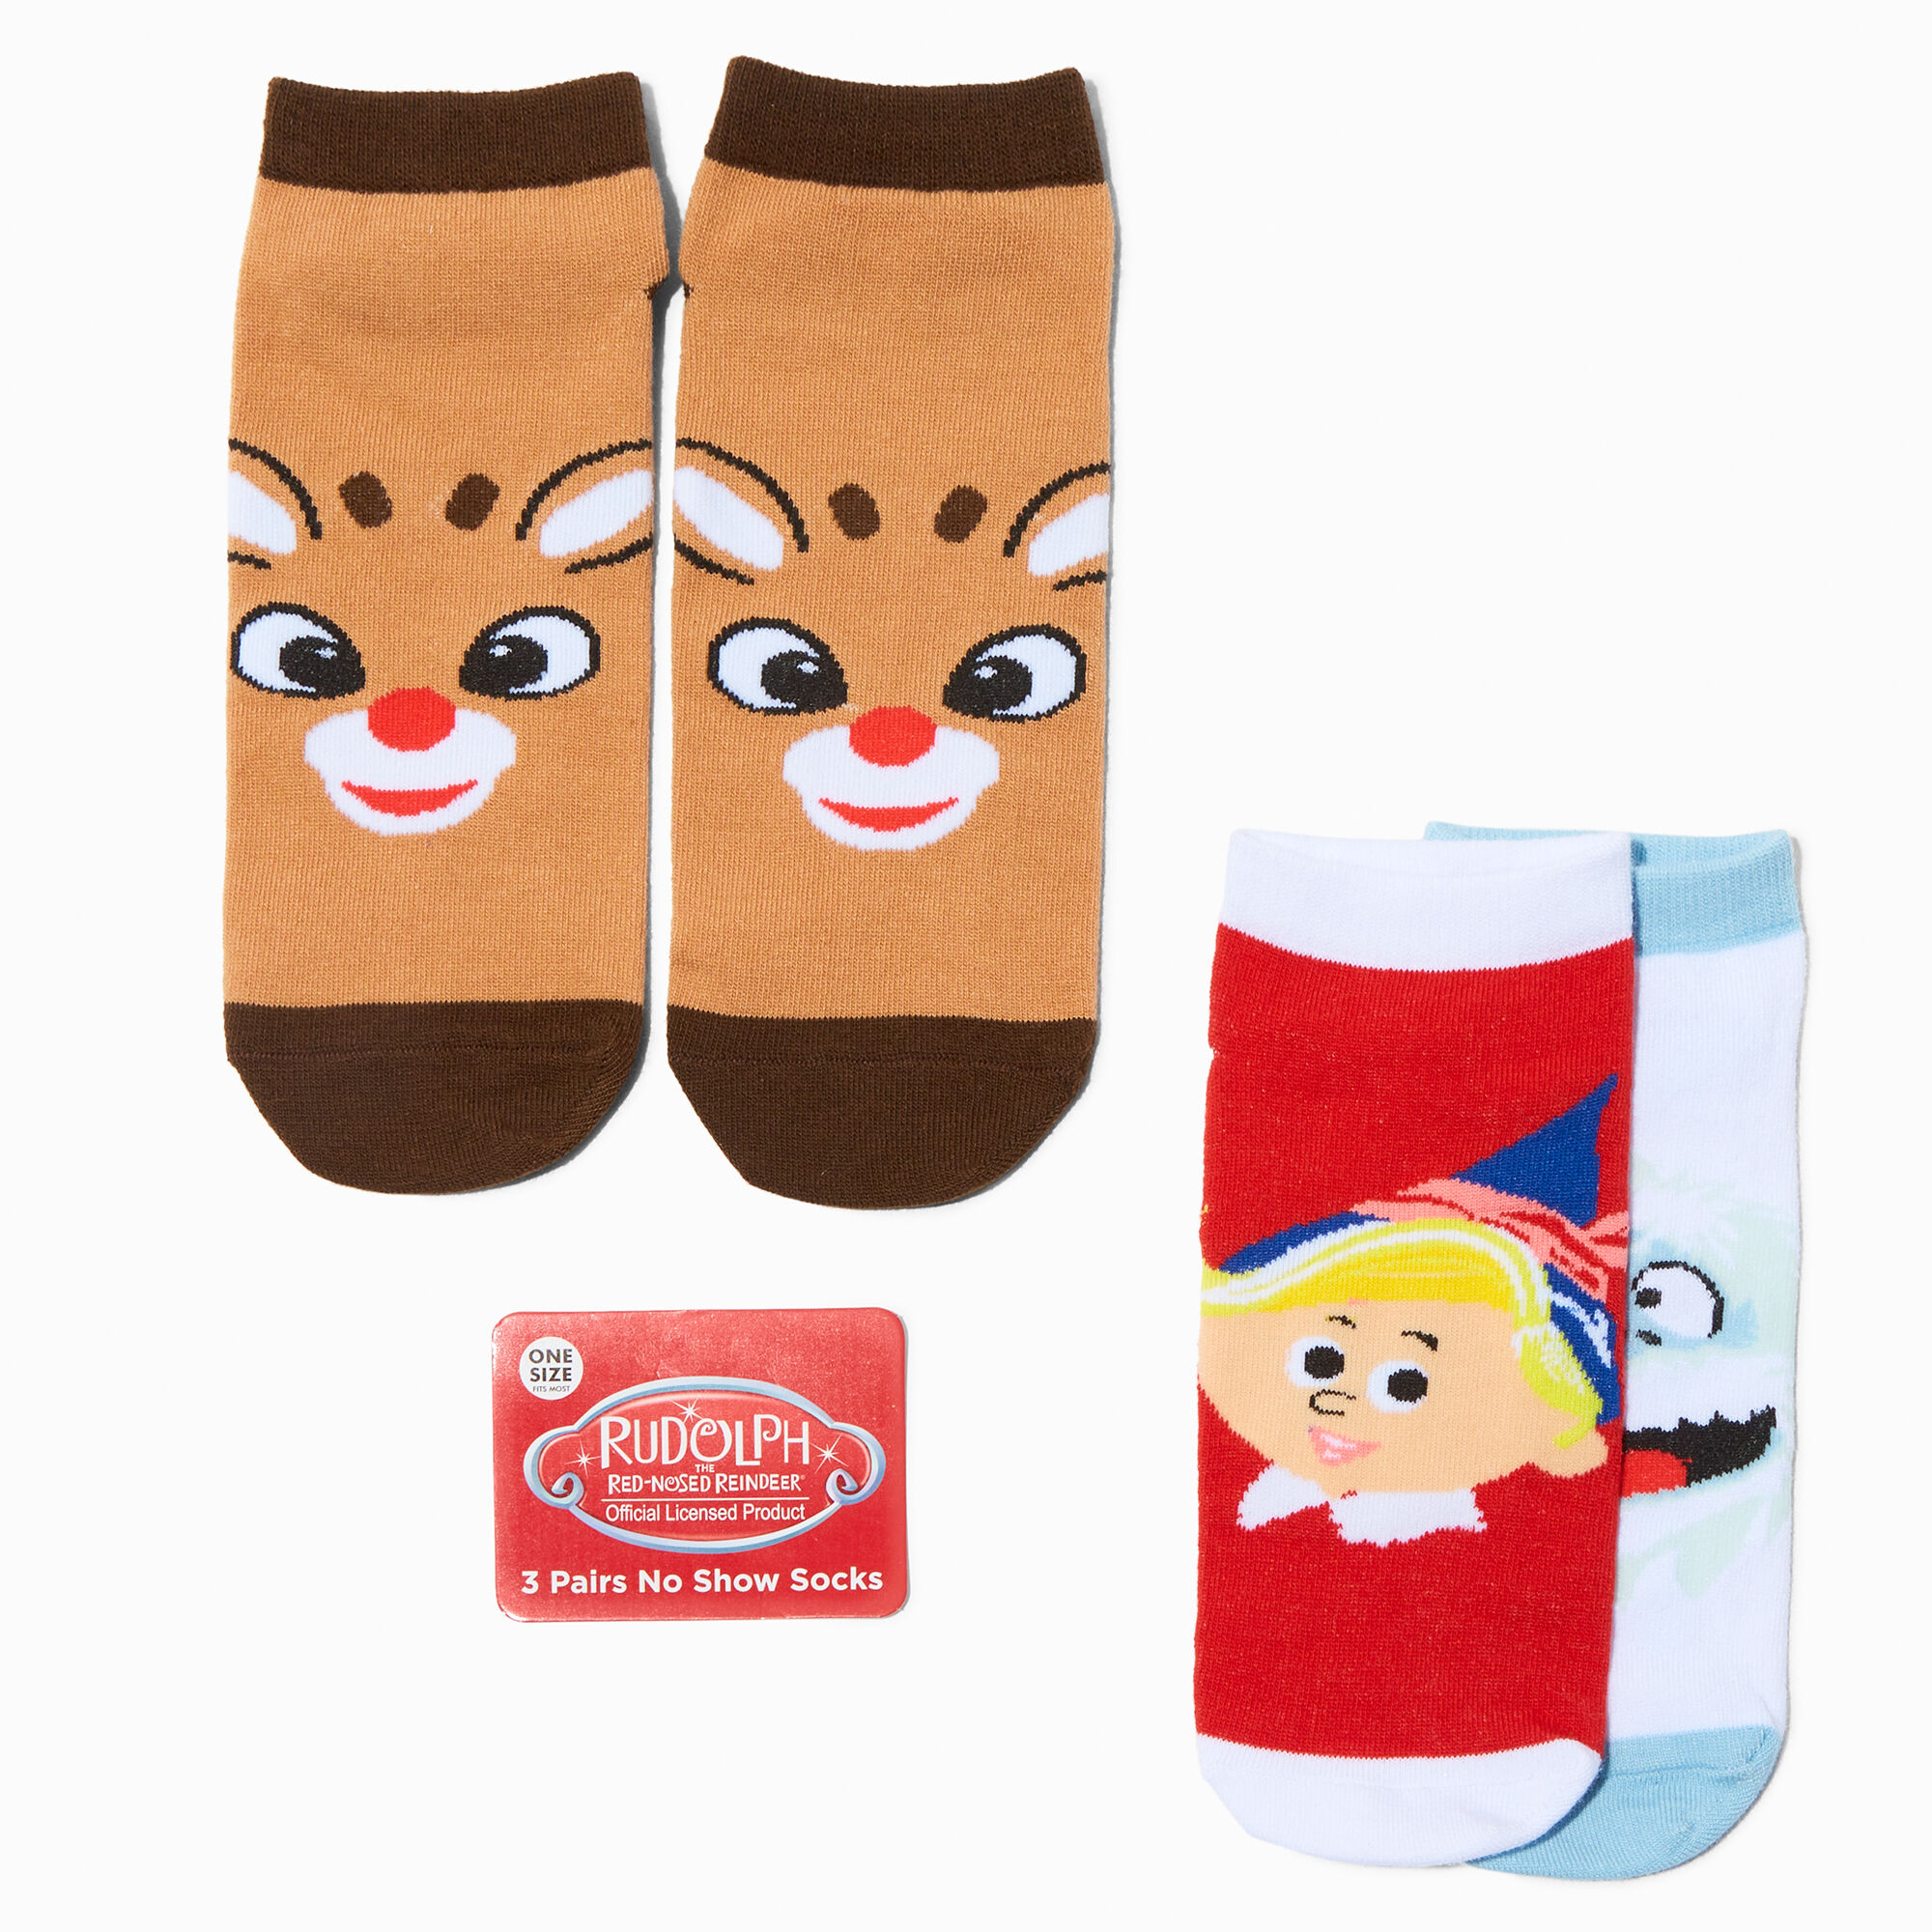 View Claires Rudolph The RedNosed Reindeer NoShow Socks 3 Pack information